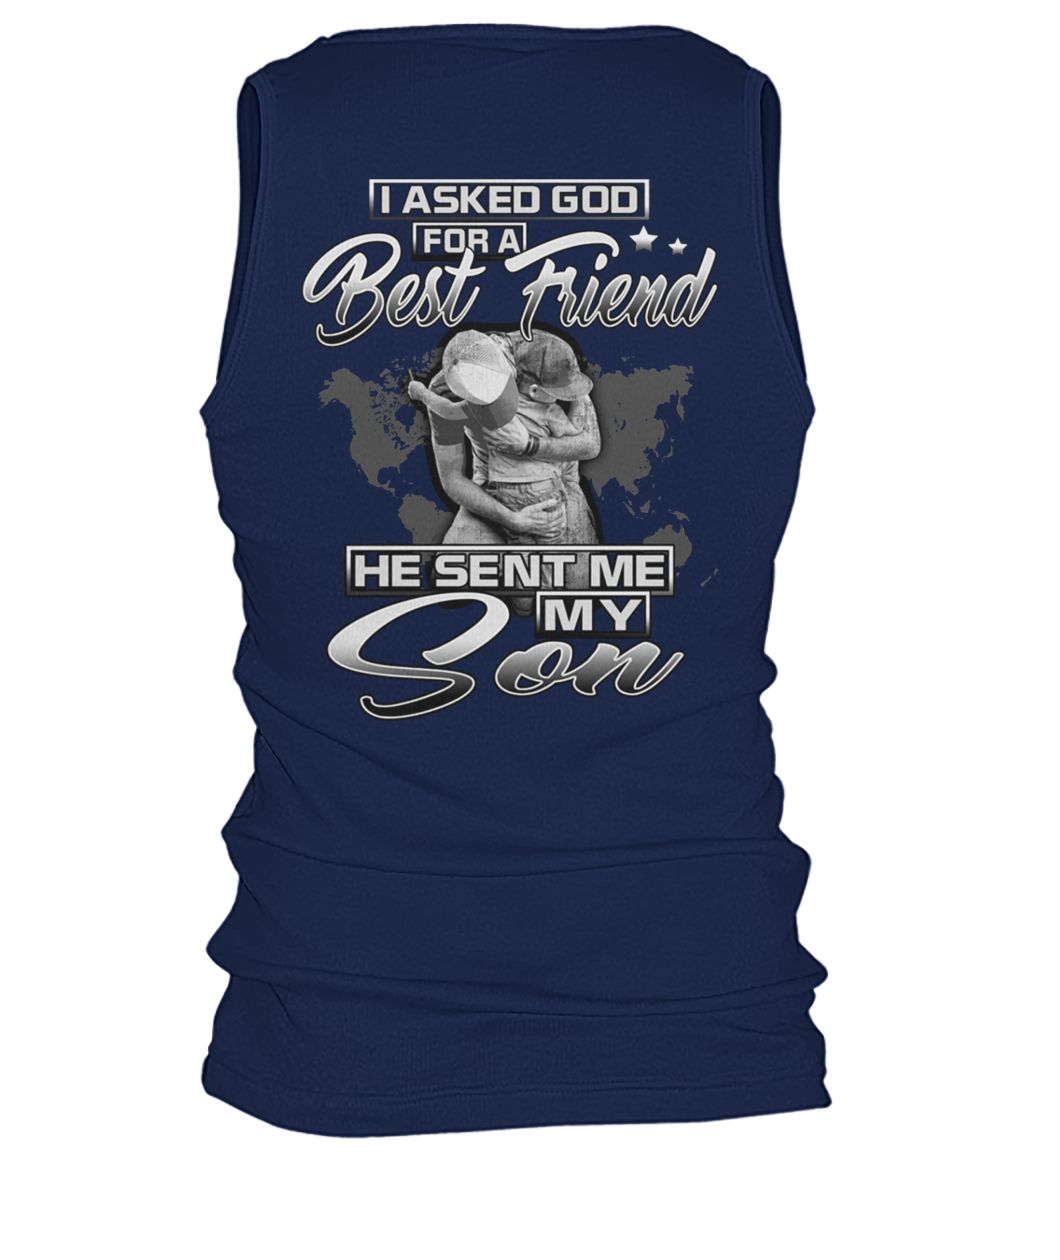 I asked god for a best friend he sent me my son men's tank top